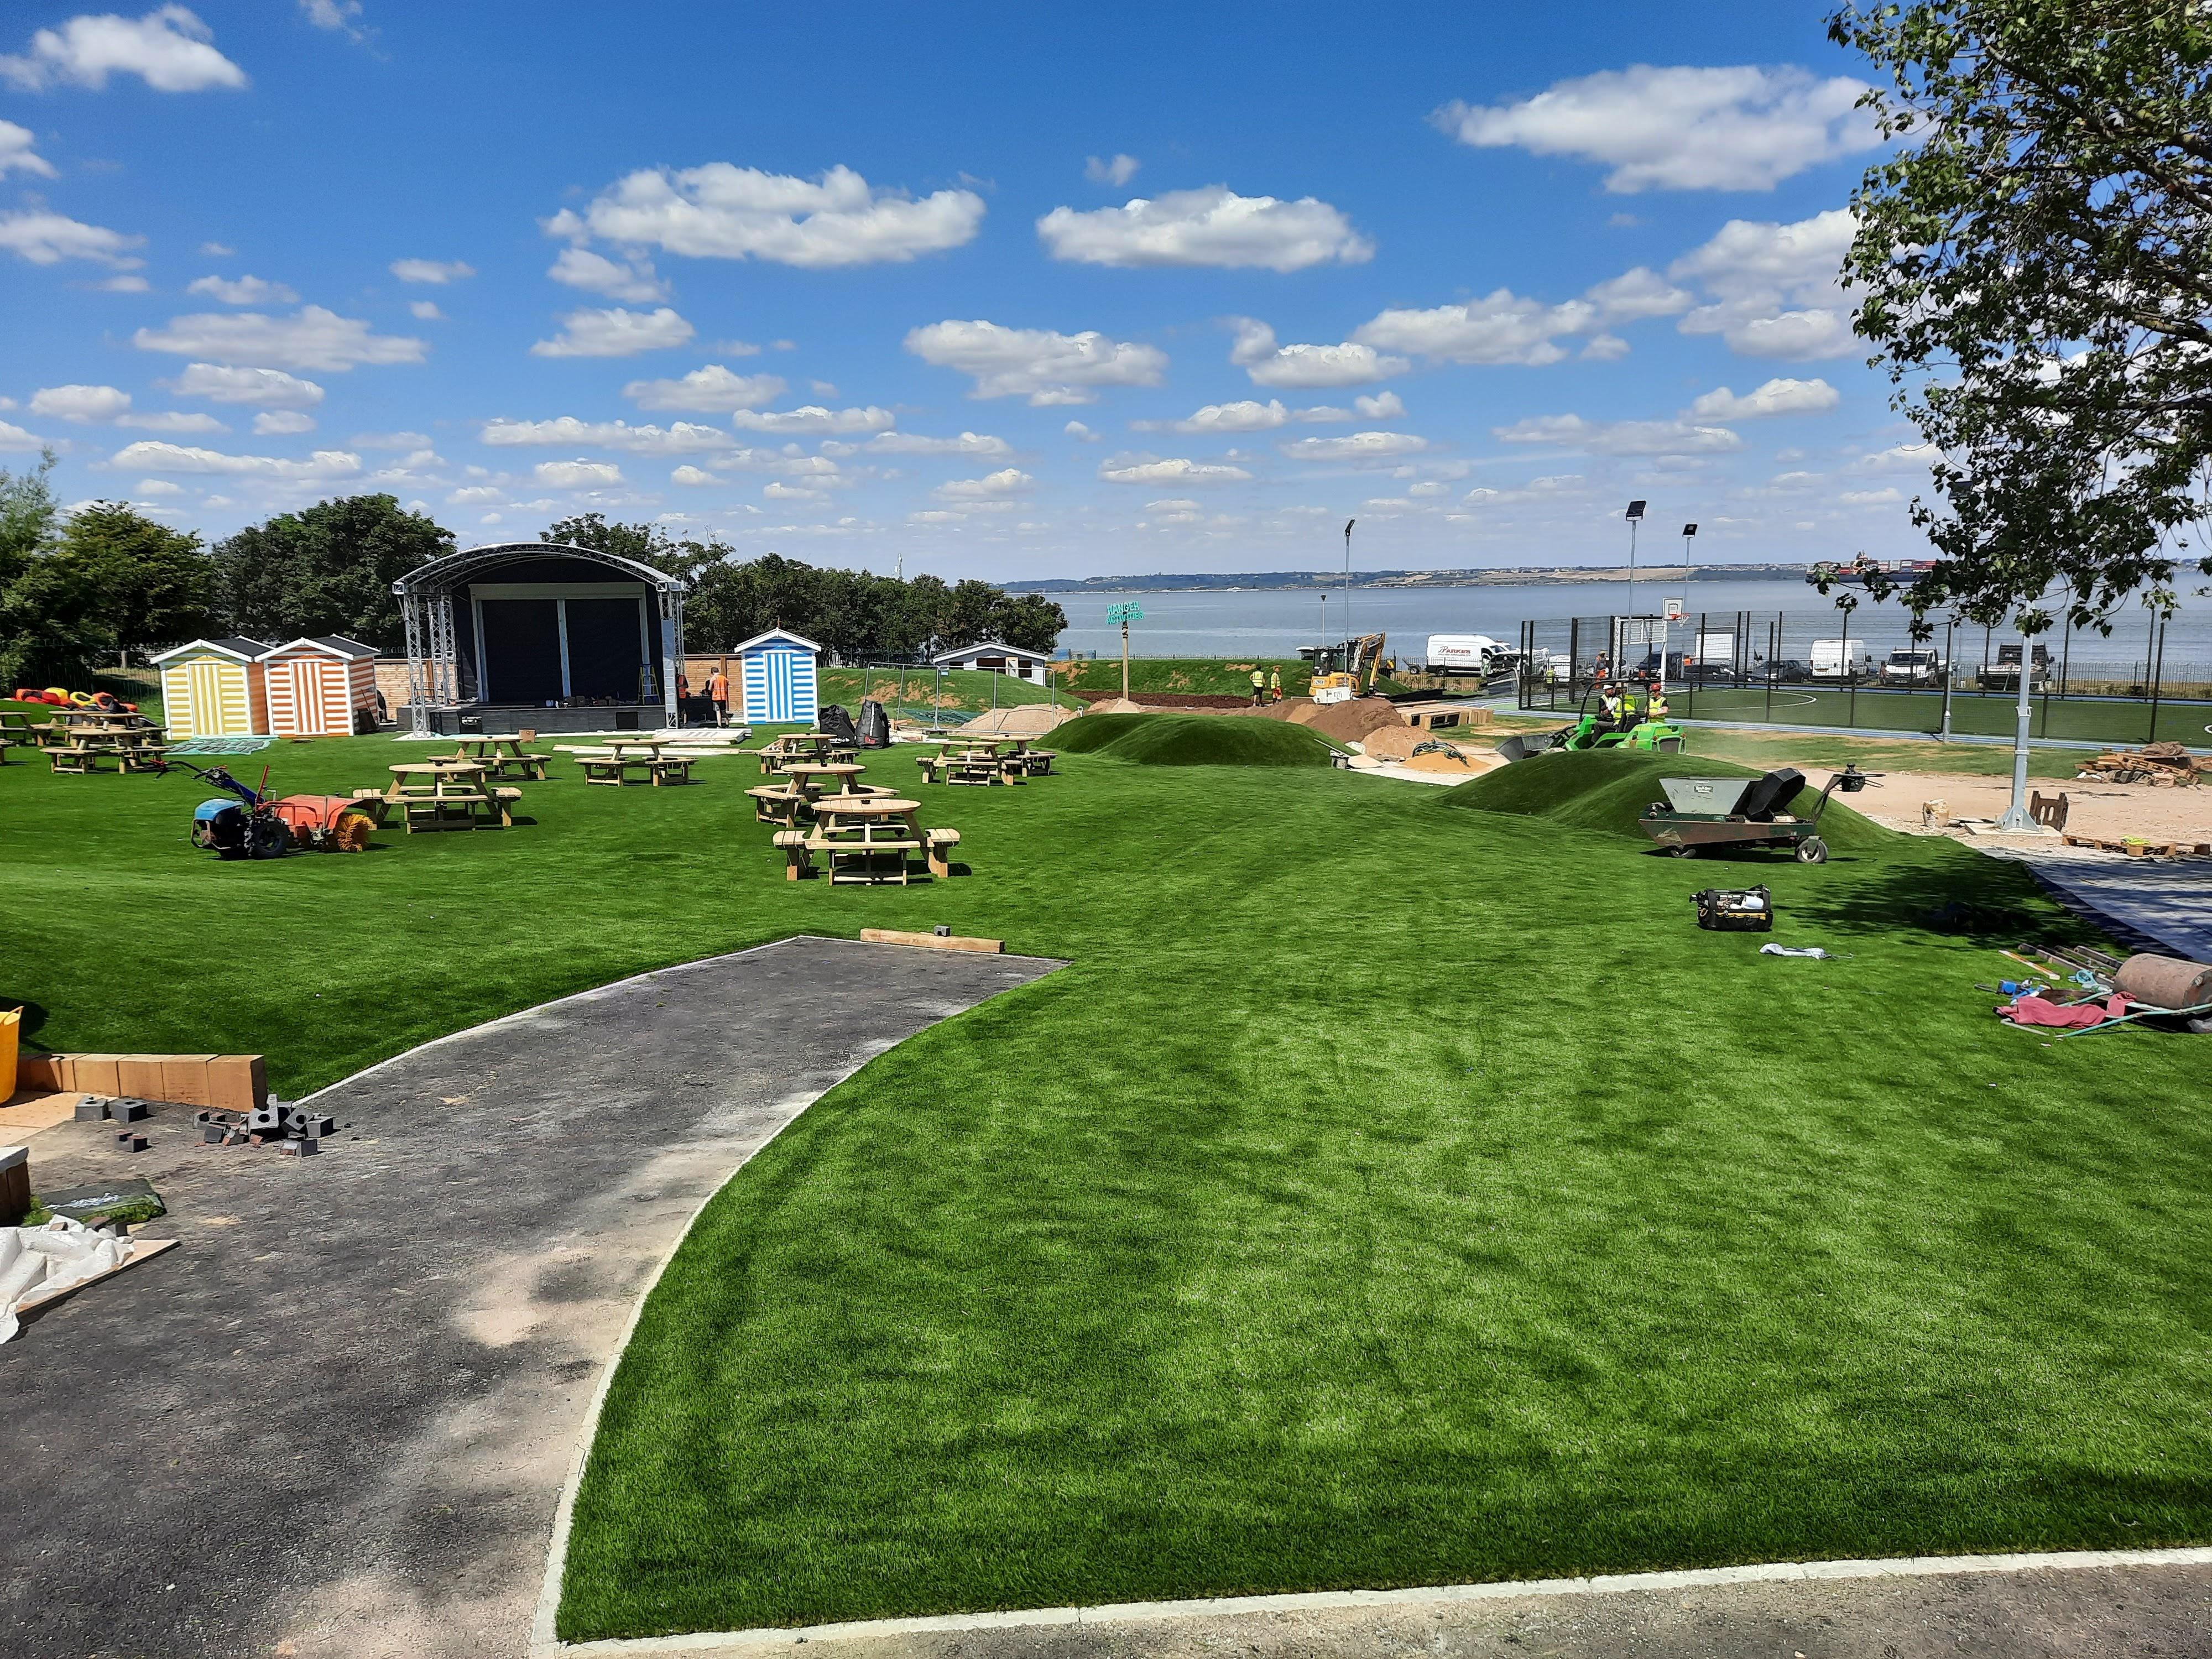 Active Lawn Installation to a Holiday Park in Kent